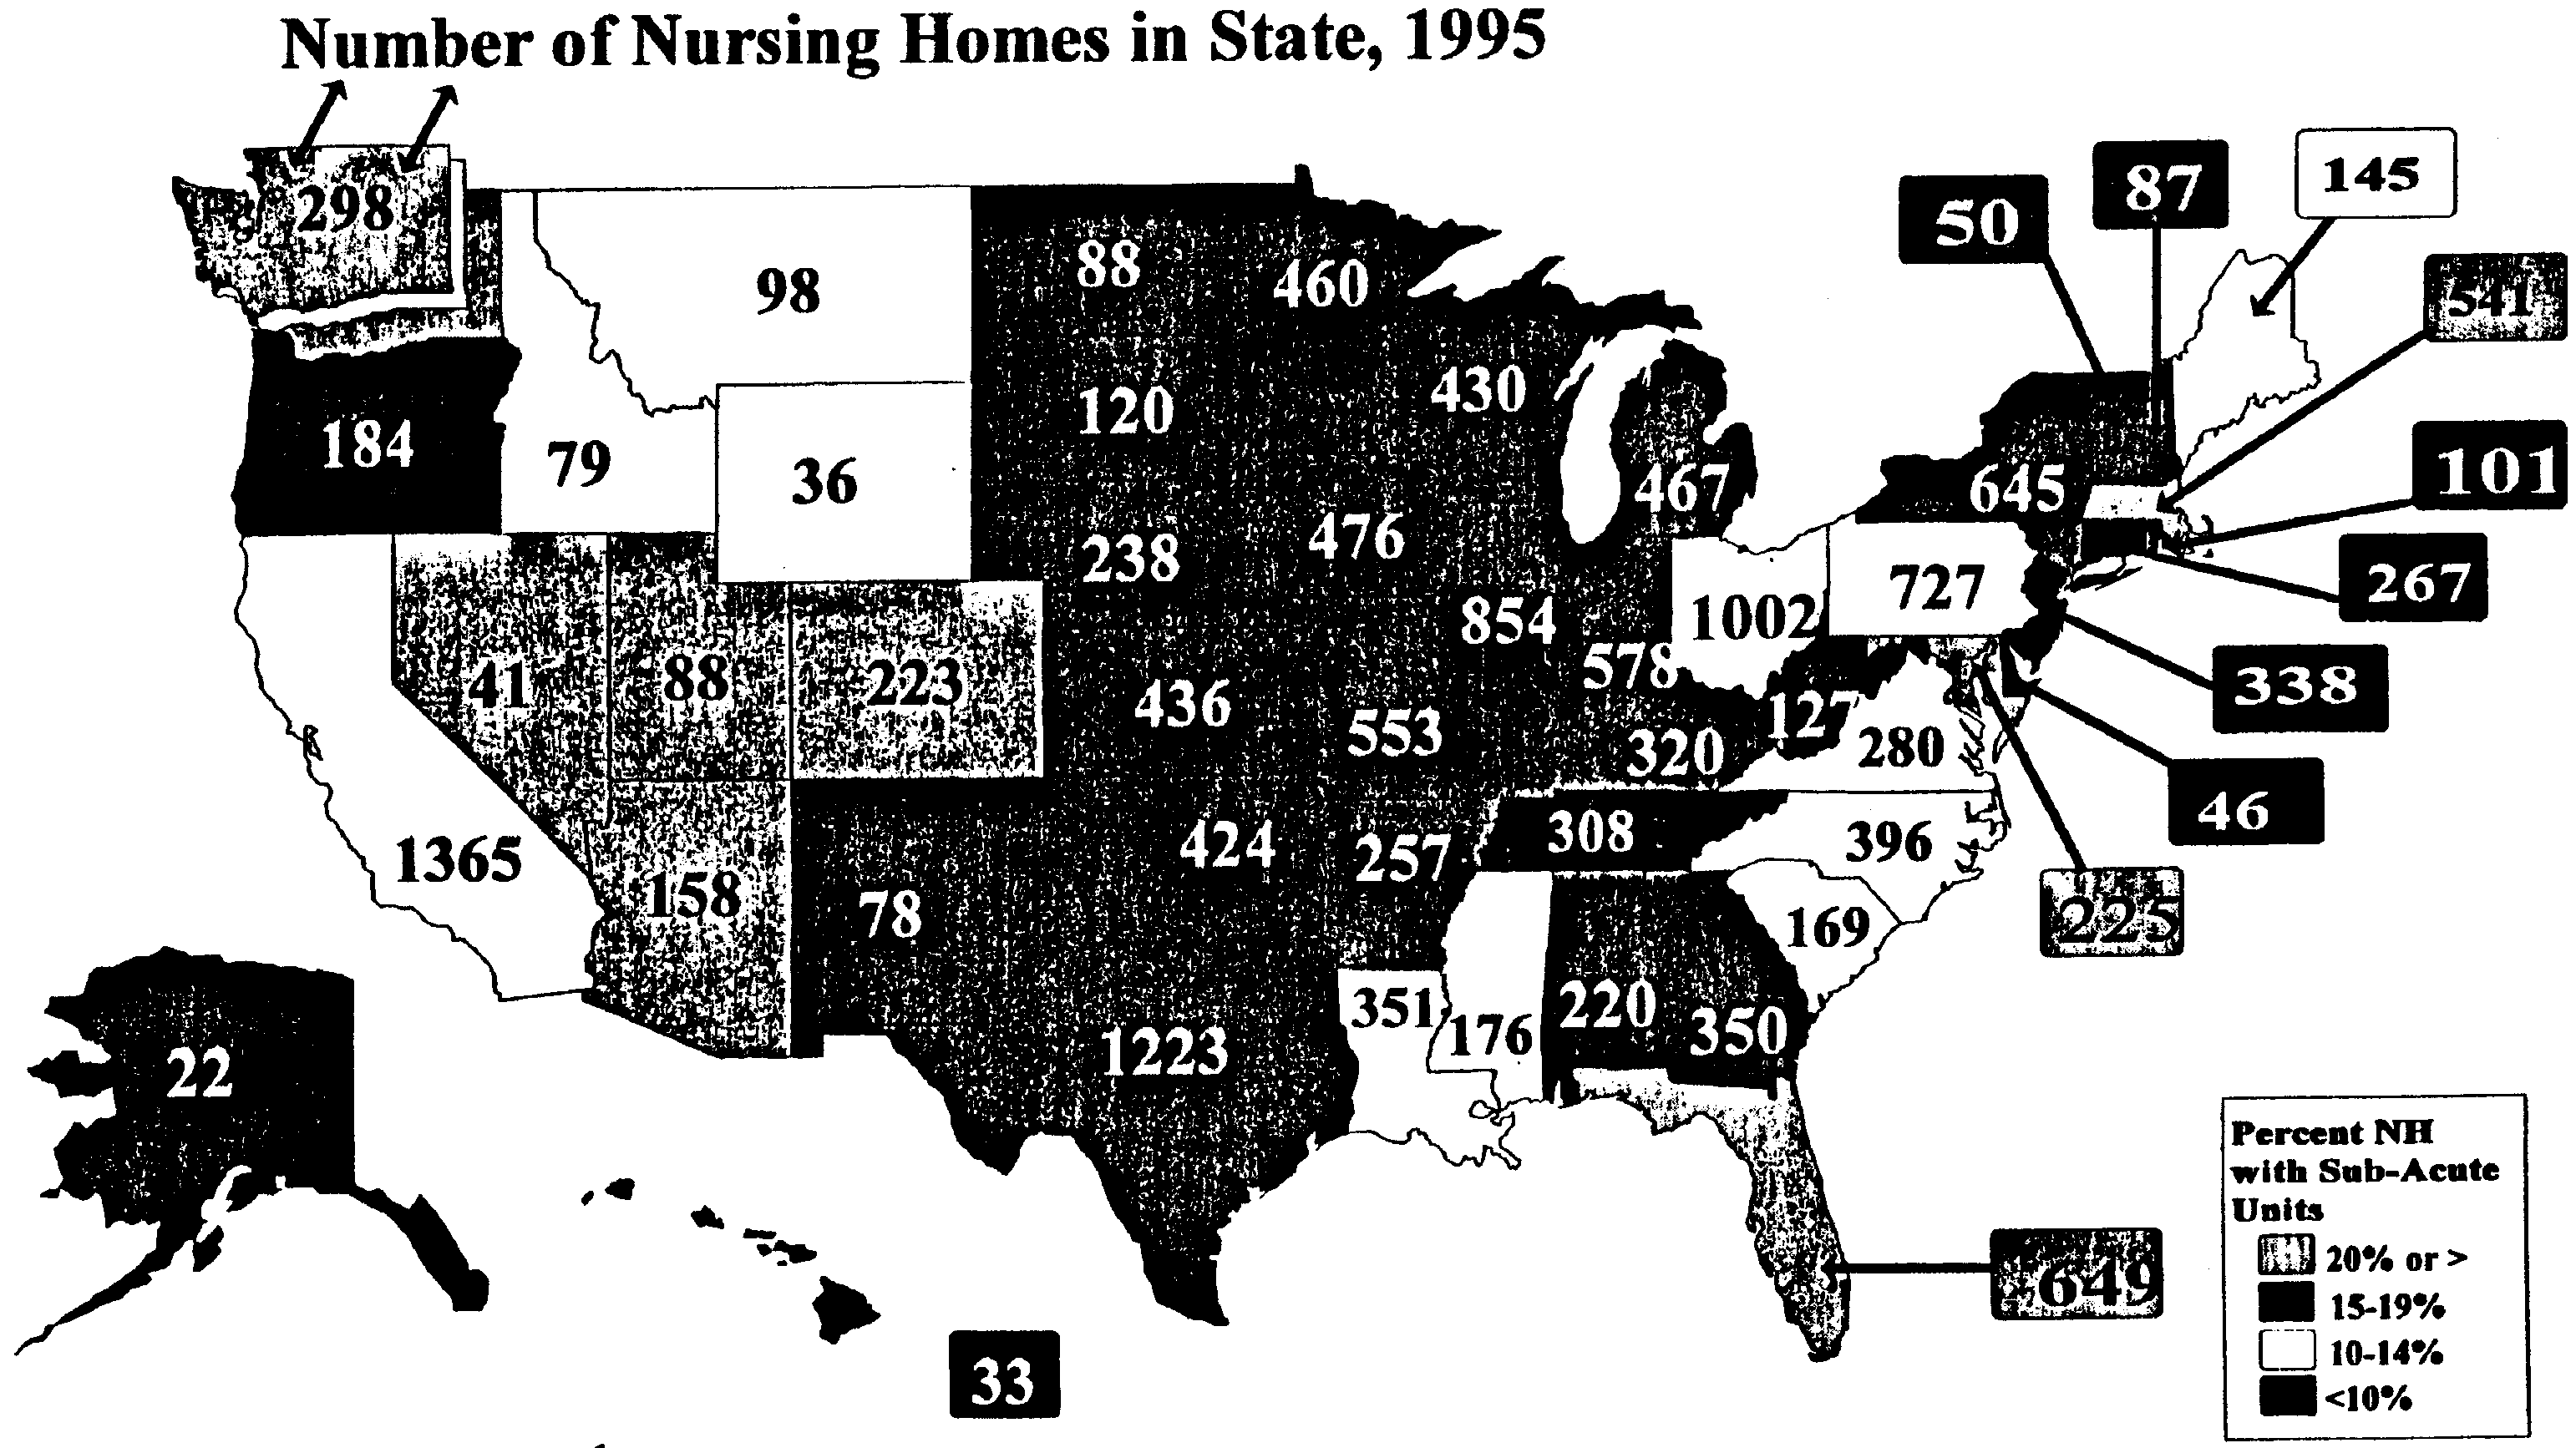 State Chart: Percent of Nursing Homes with Sub-acute Units in Each State, 1995/96